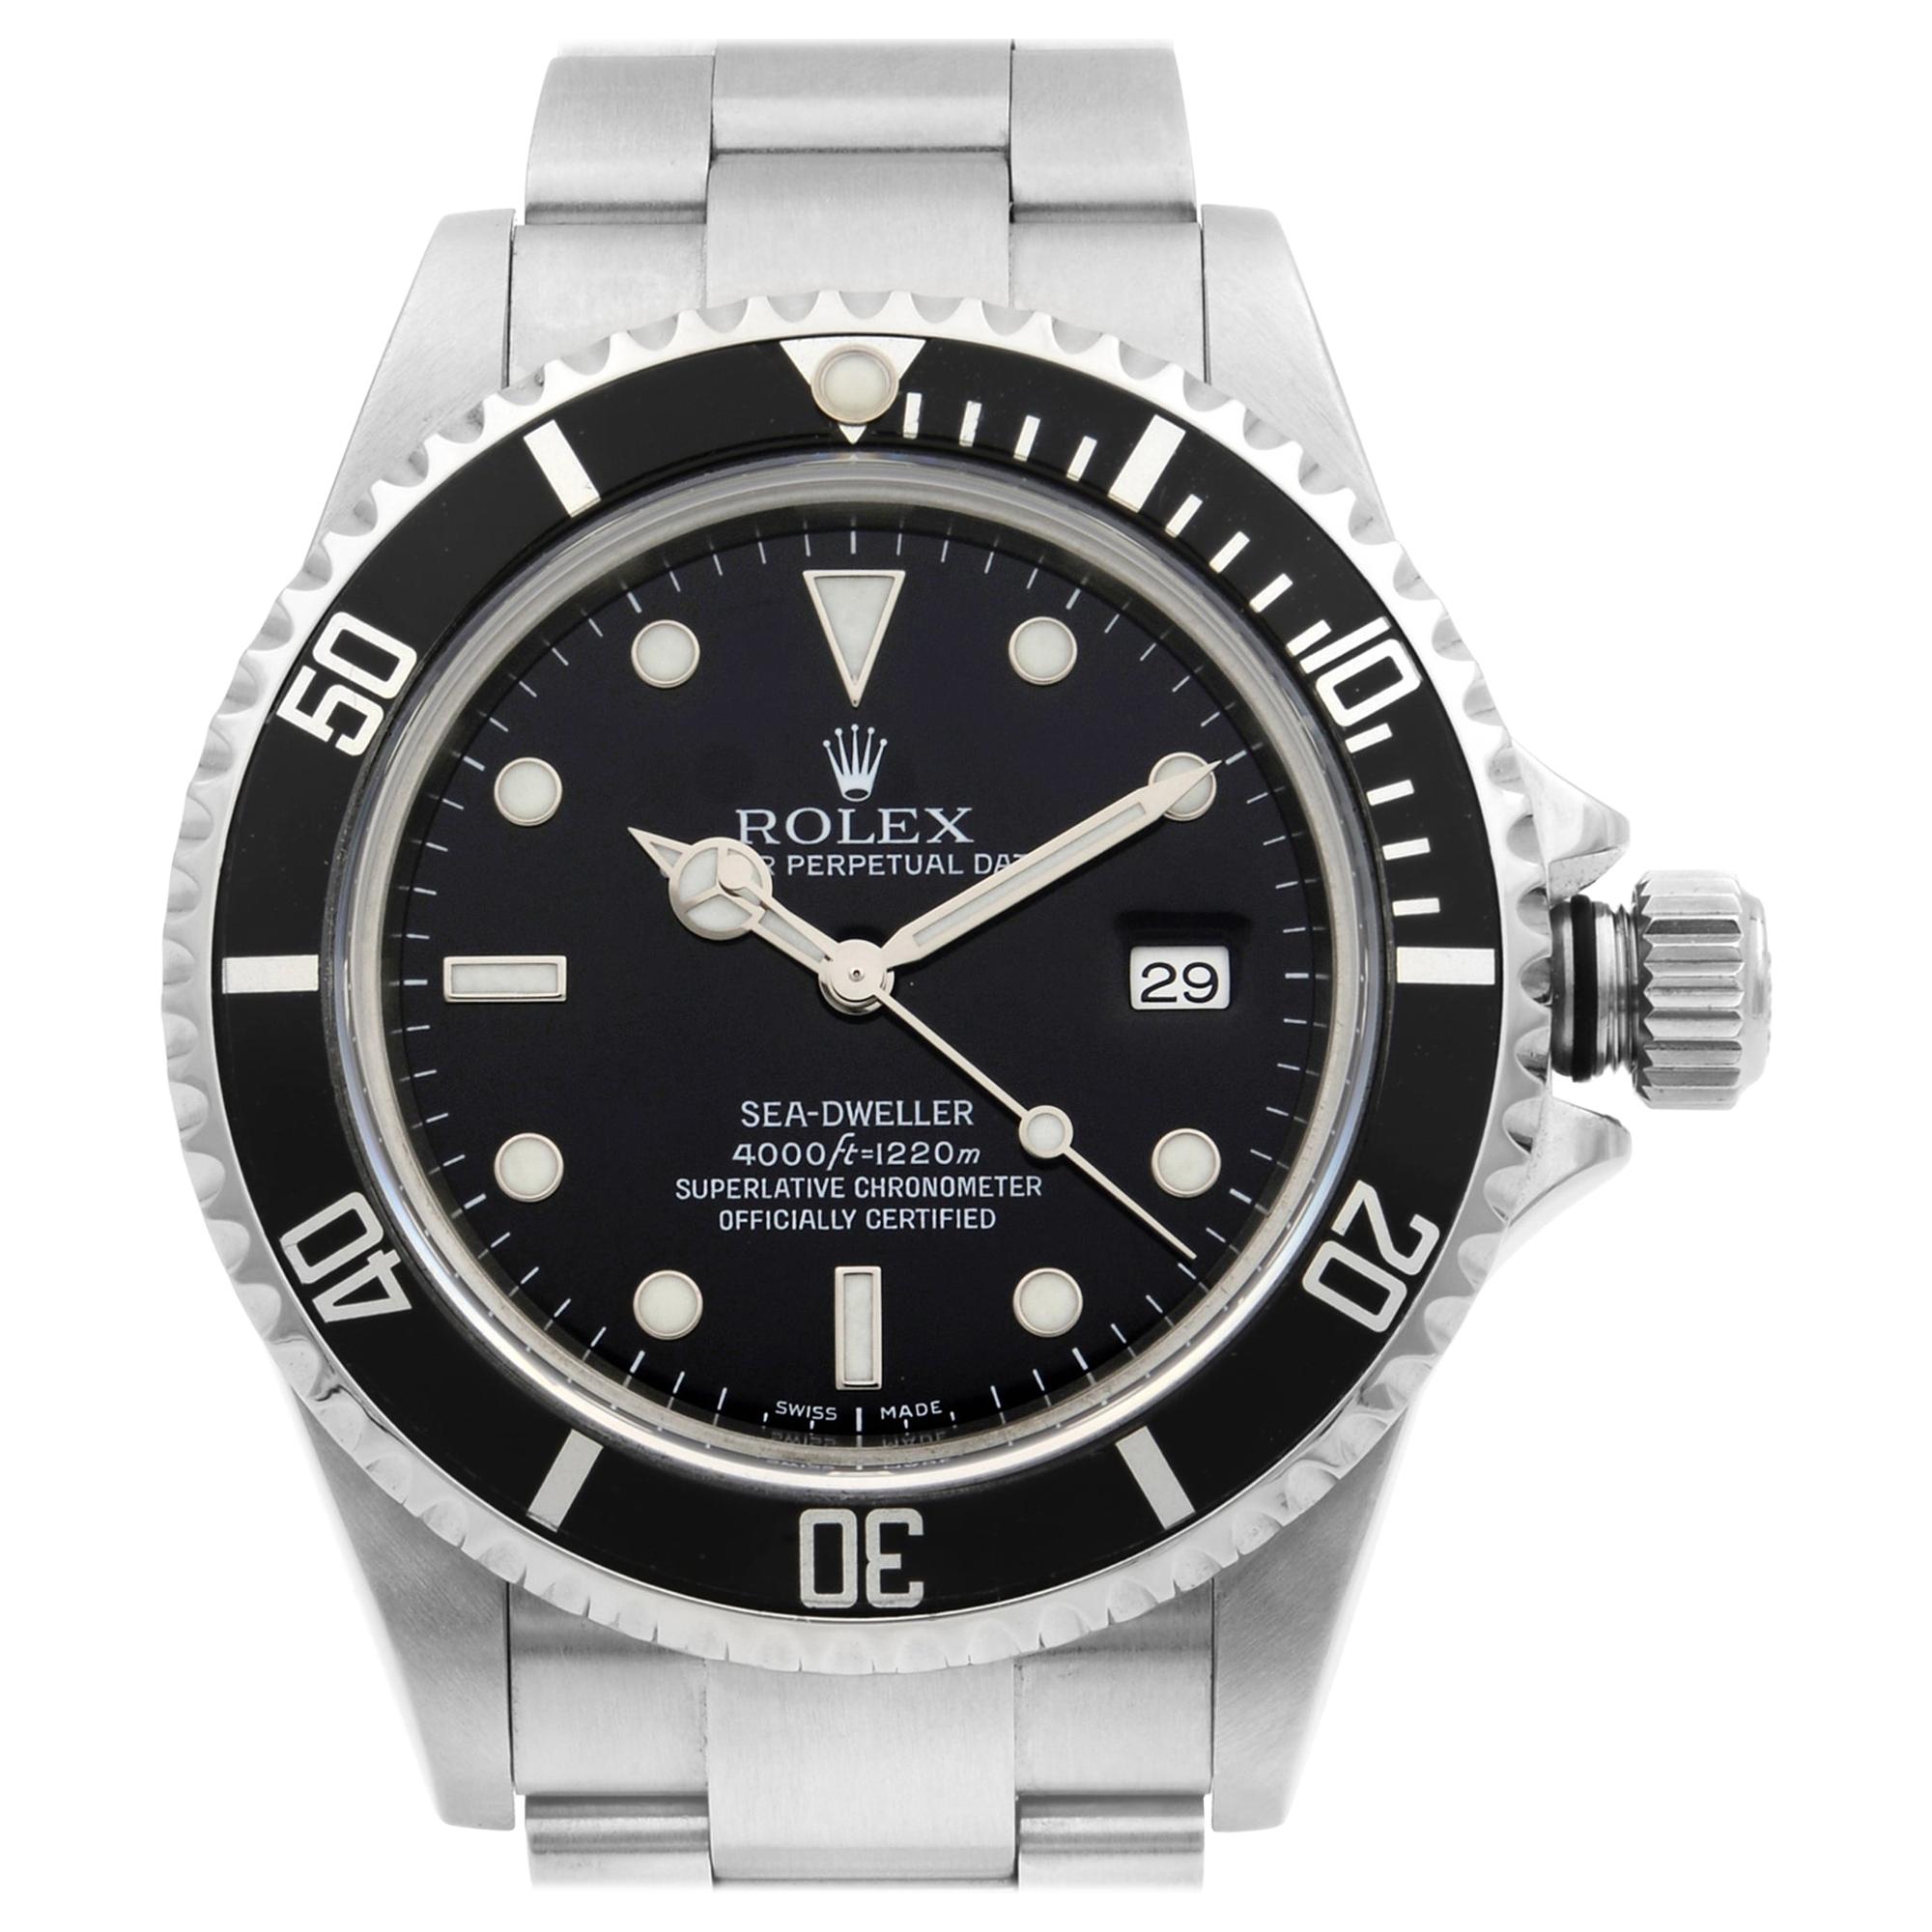 Rolex Sea-Dweller Stainless Steel Black Dial Automatic Men’s Watch 16600